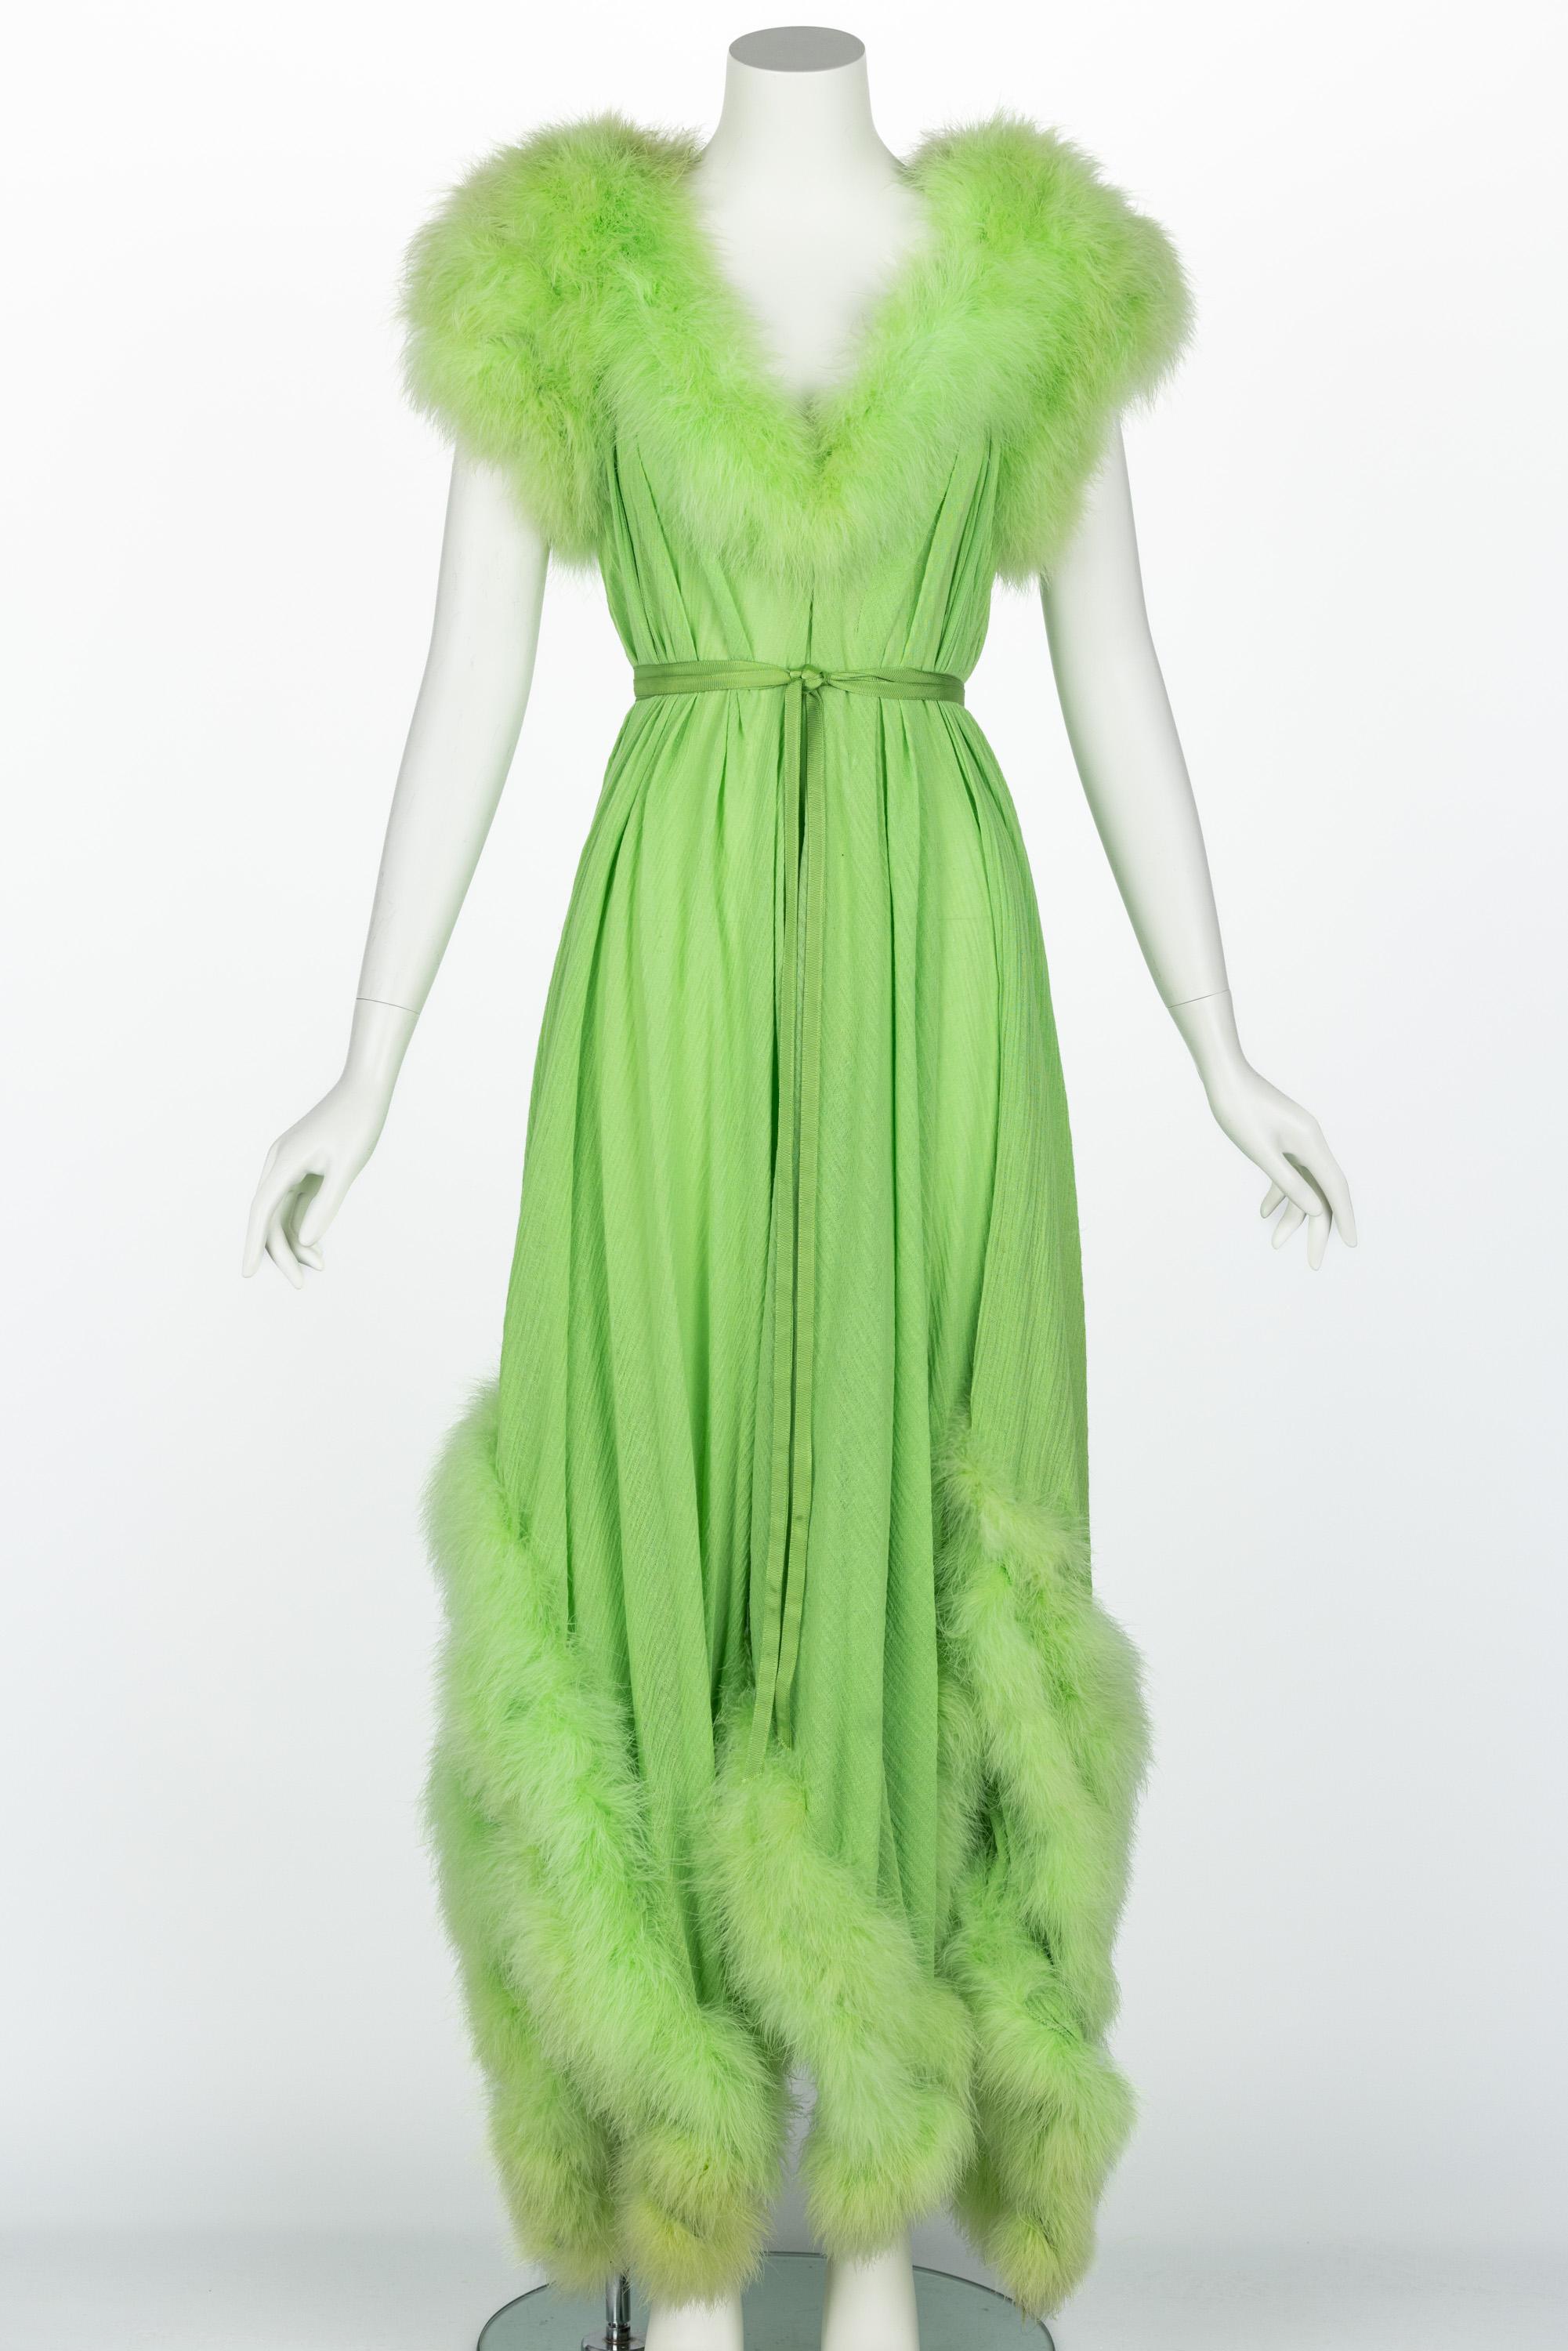 Vintage Light Green Maribou Feather Trimmed Maxi Dress  In Good Condition For Sale In Boca Raton, FL